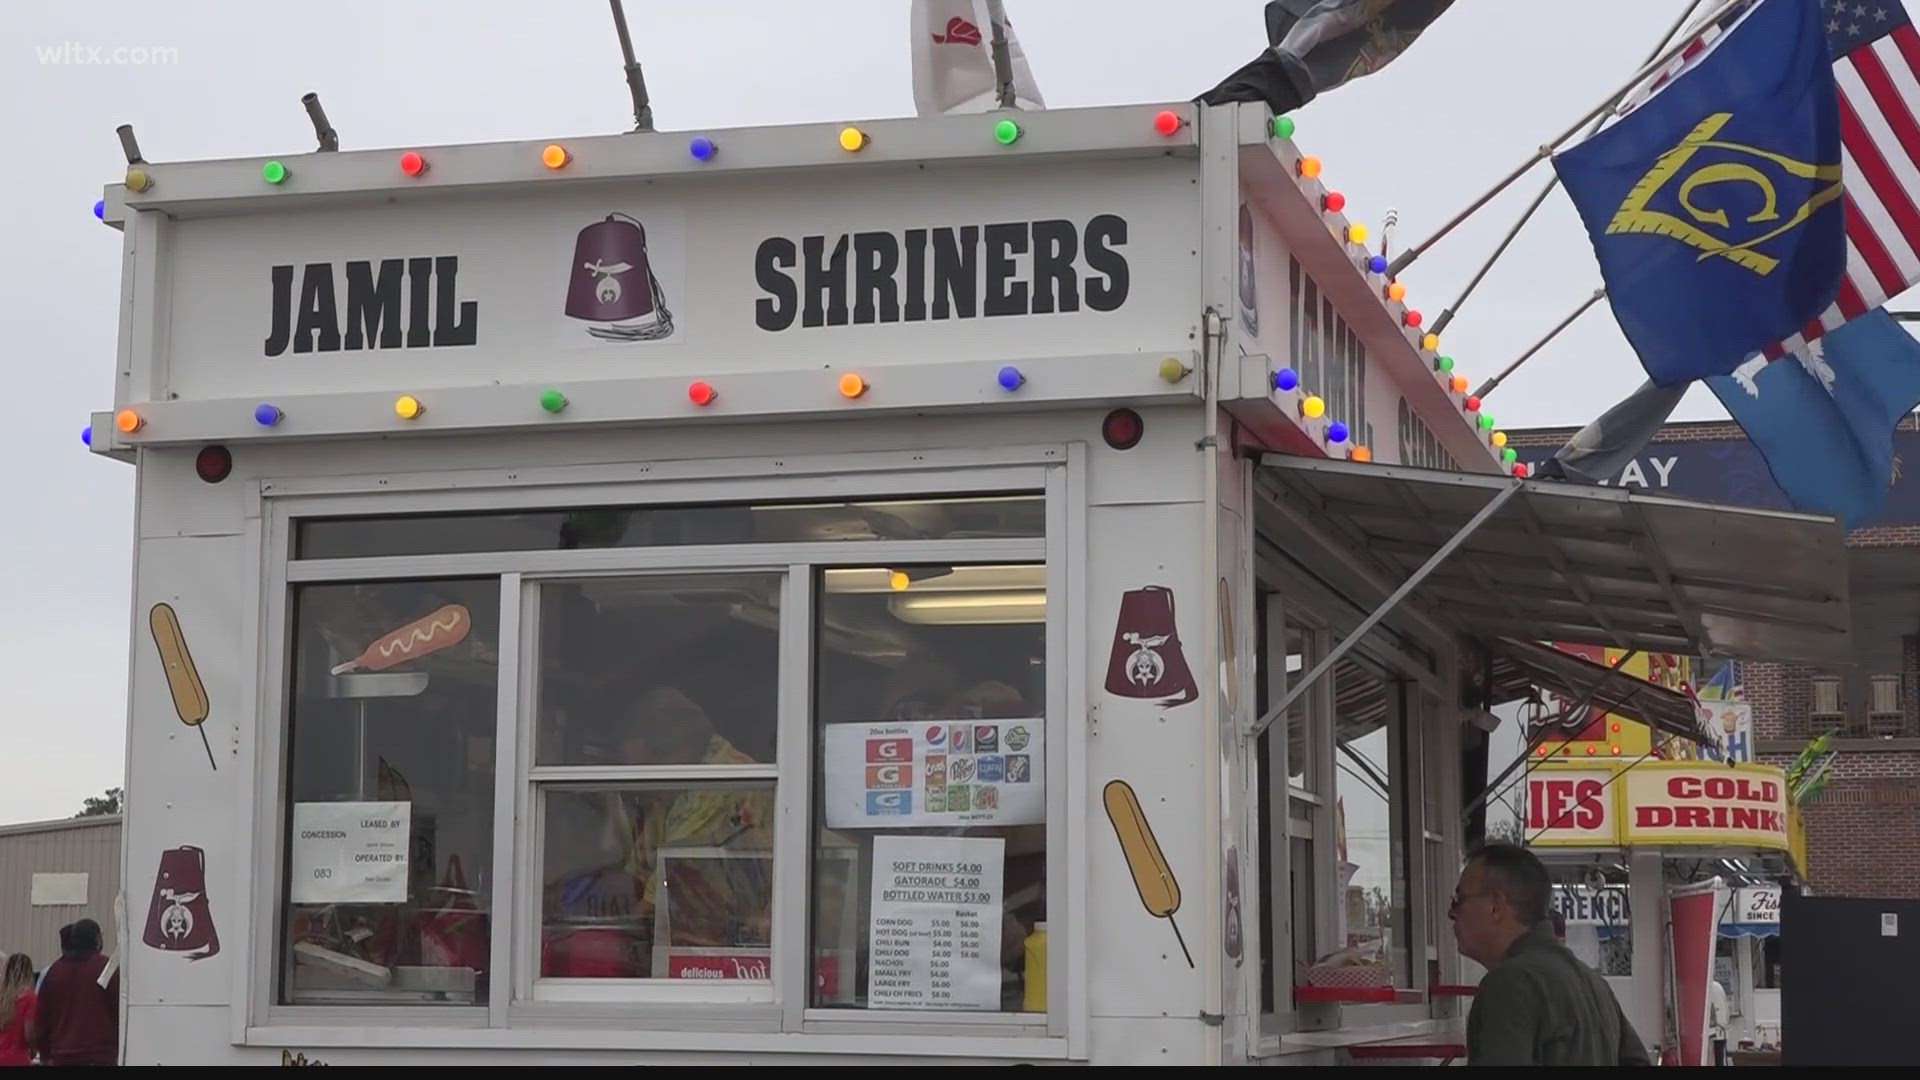 The Jamil Shriners have been at the SC State Fair for over fifty years.